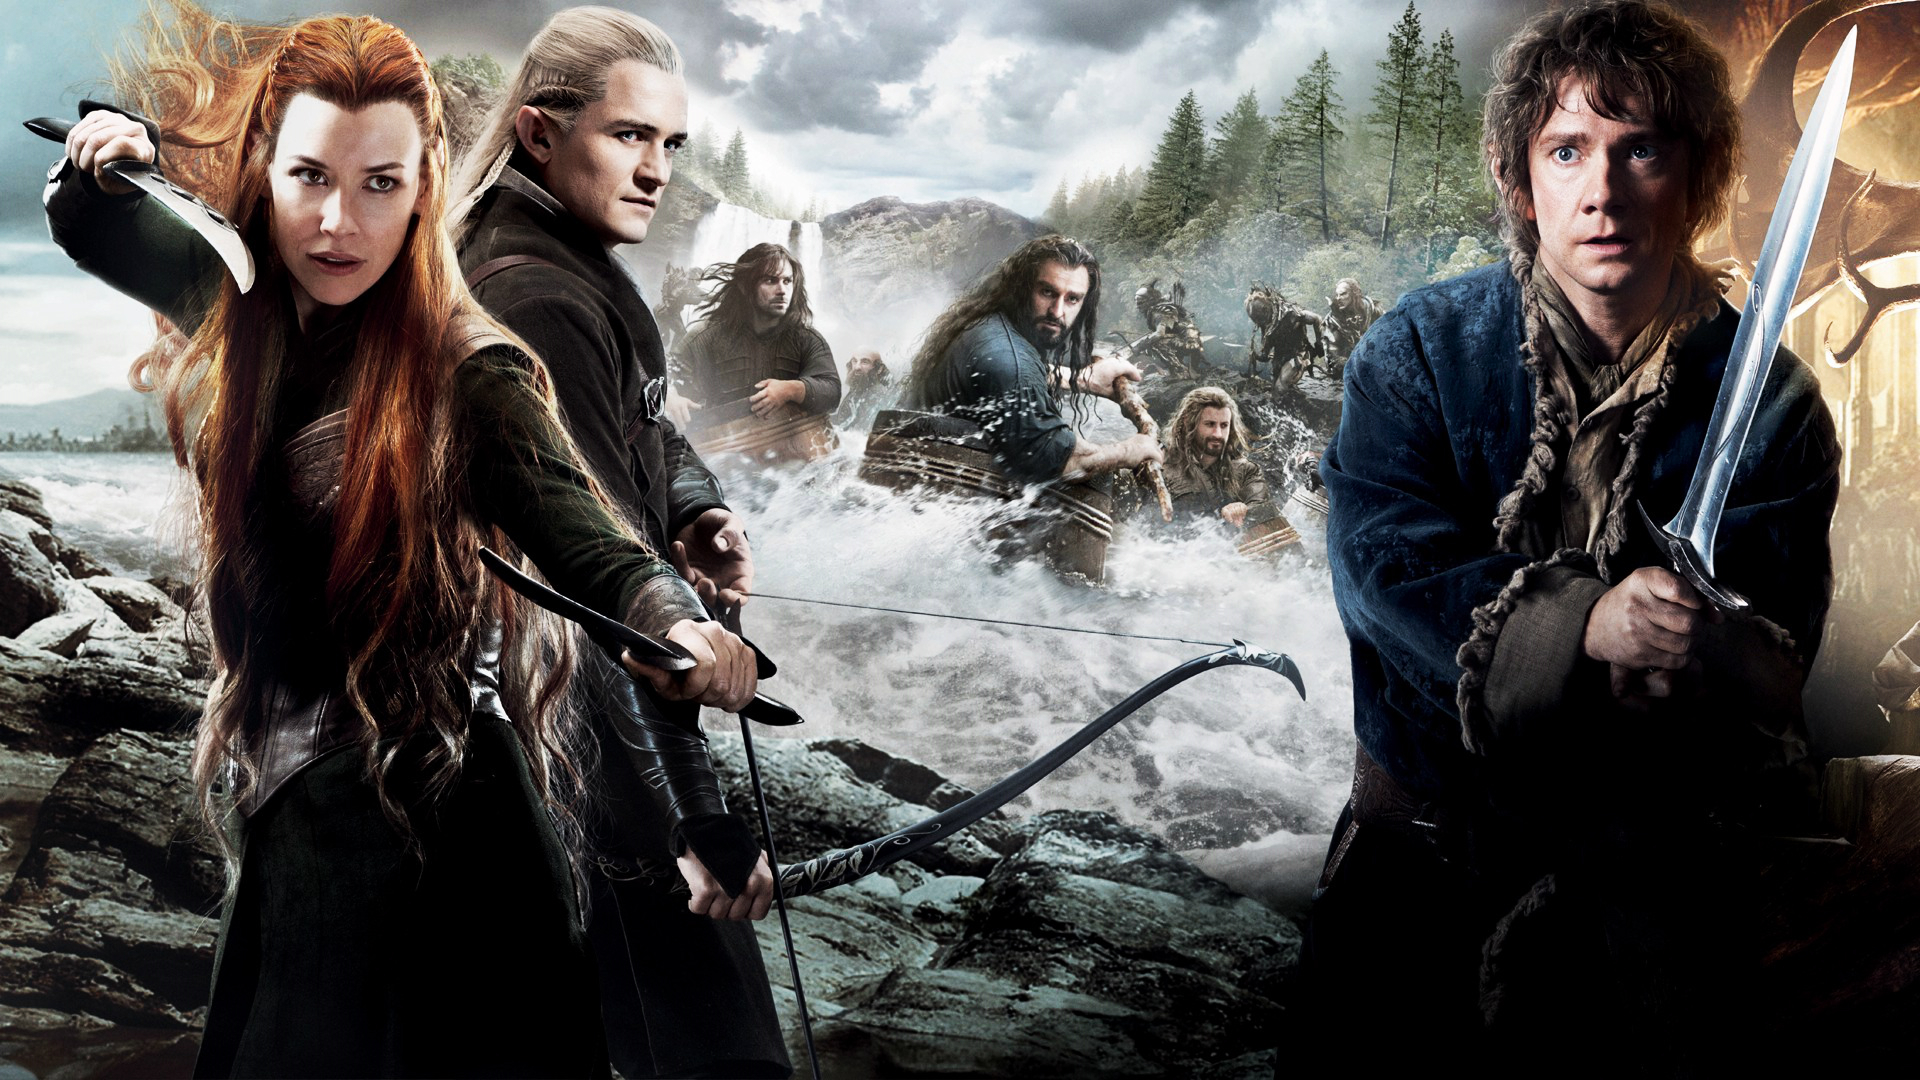 Movie The Hobbit: The Battle of the Five Armies HD Wallpaper | Background Image